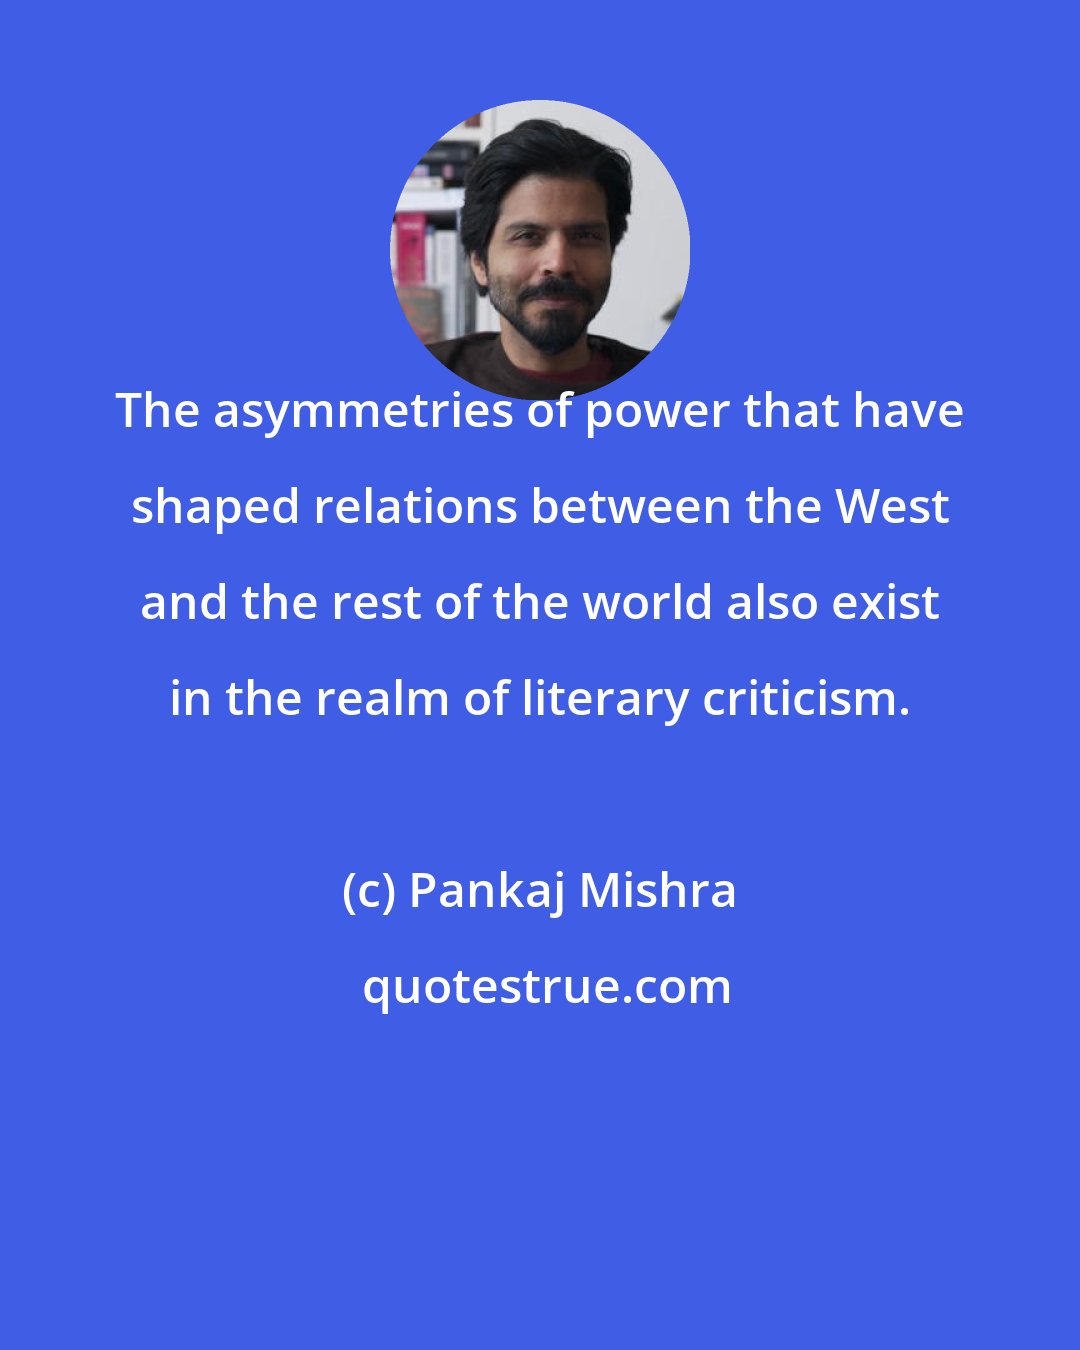 Pankaj Mishra: The asymmetries of power that have shaped relations between the West and the rest of the world also exist in the realm of literary criticism.